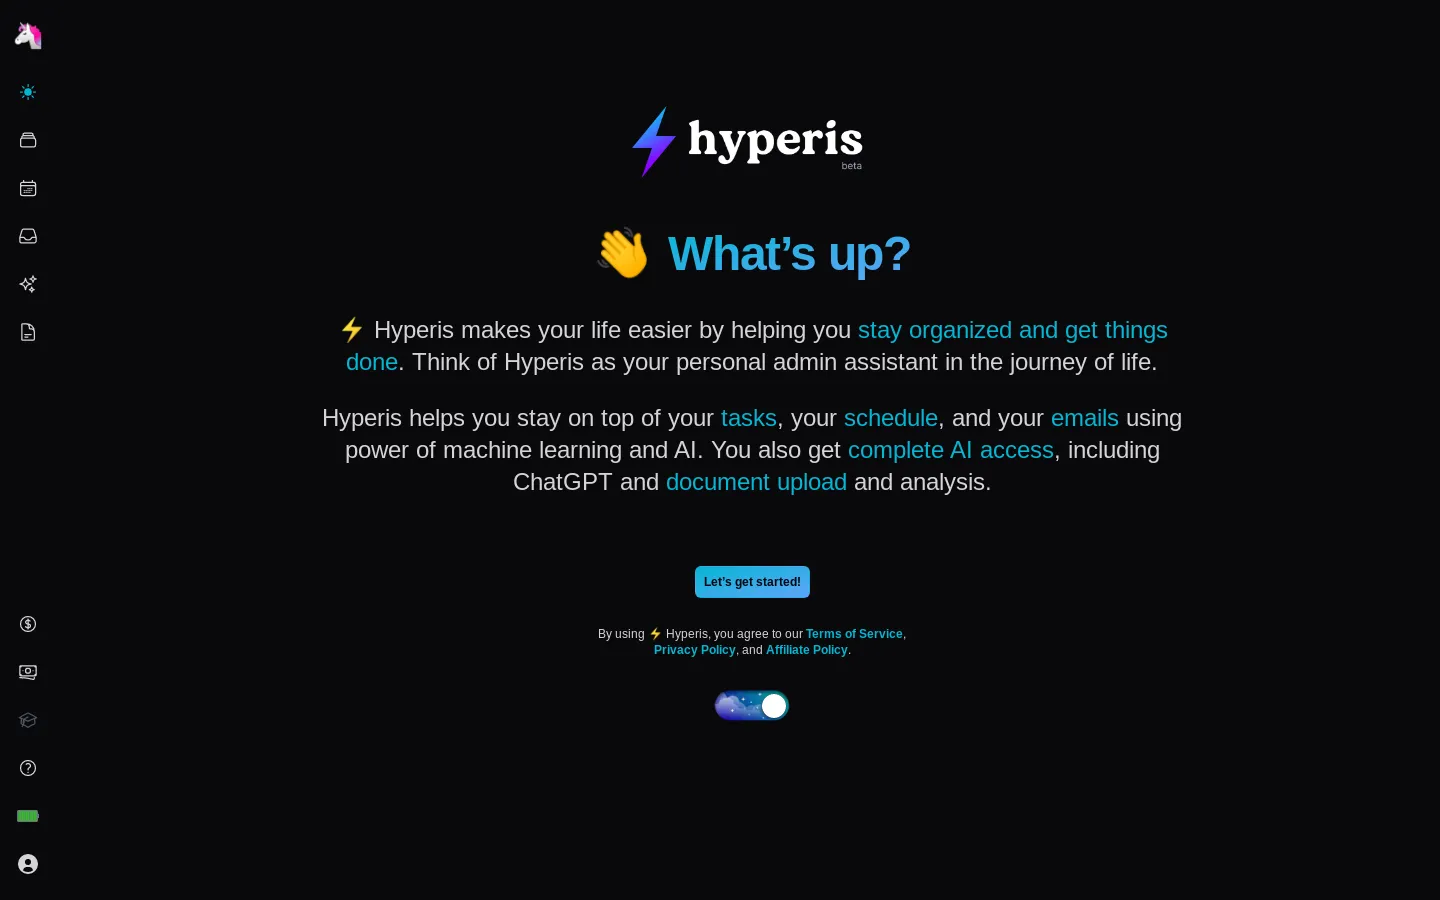 Hyperis | Your Personal Admin Assistant